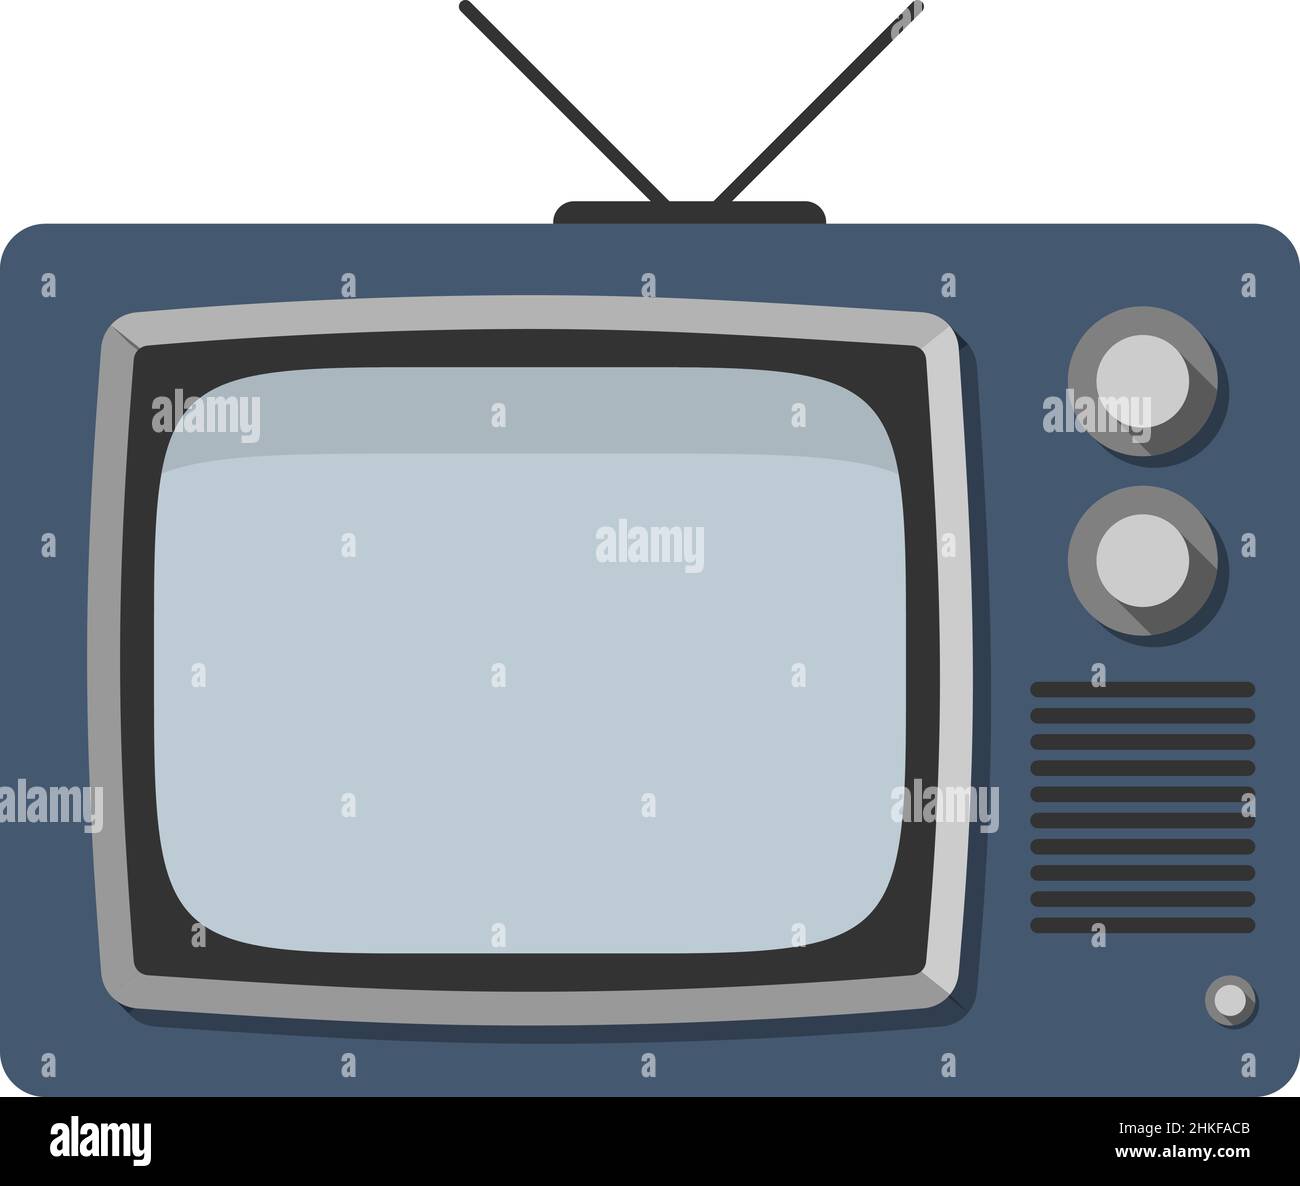 vintage old tube television, crt tv set isolated on white background, vector illustration Stock Vector